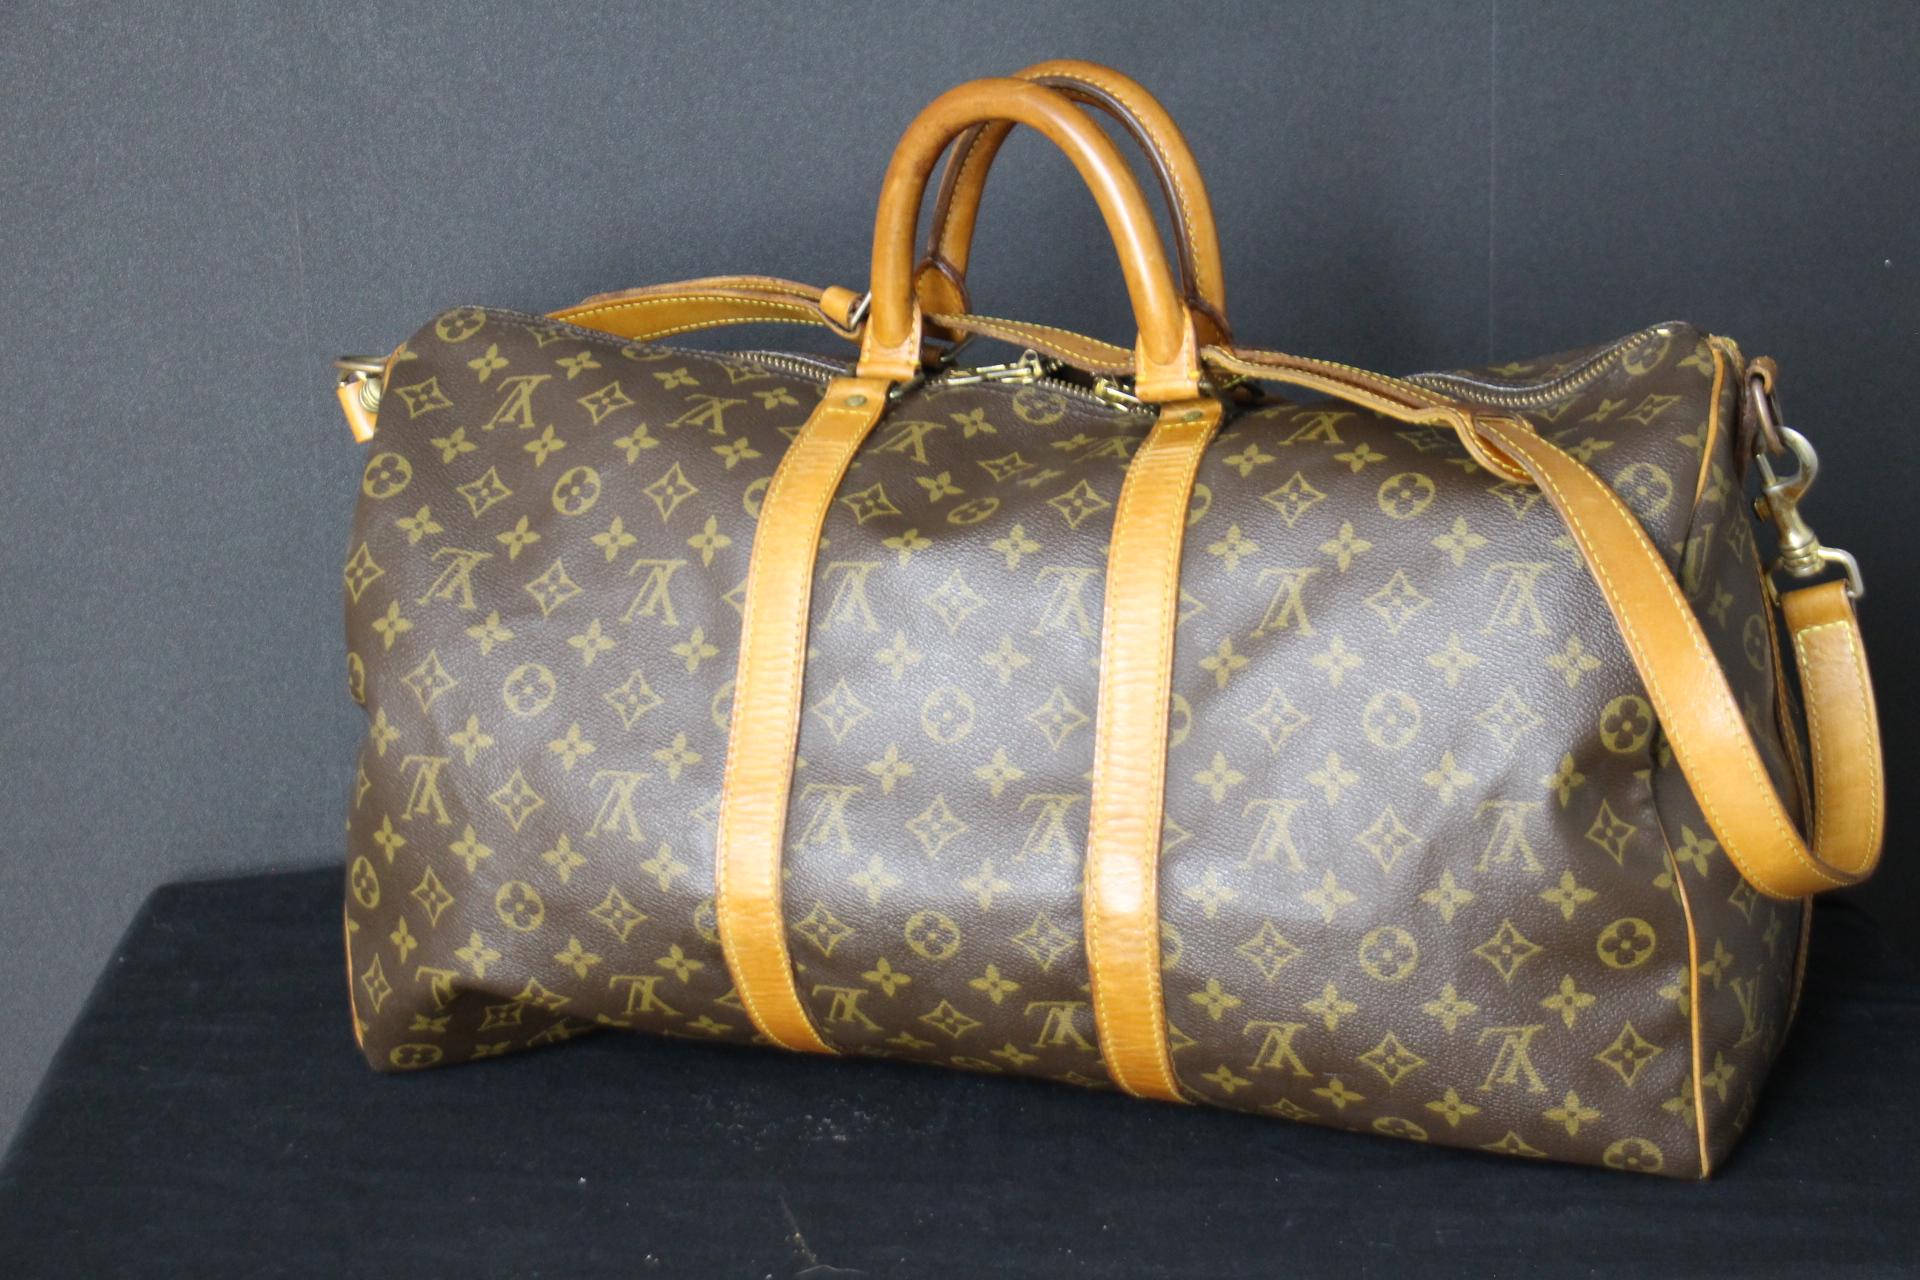 This keepall is one of the most iconic Louis Vuitton bags.It is very interesting beacause it is classic and very modern in the same time.It features monogram canvas as well as very comfortable leather handles and its original Louis Vuitton all